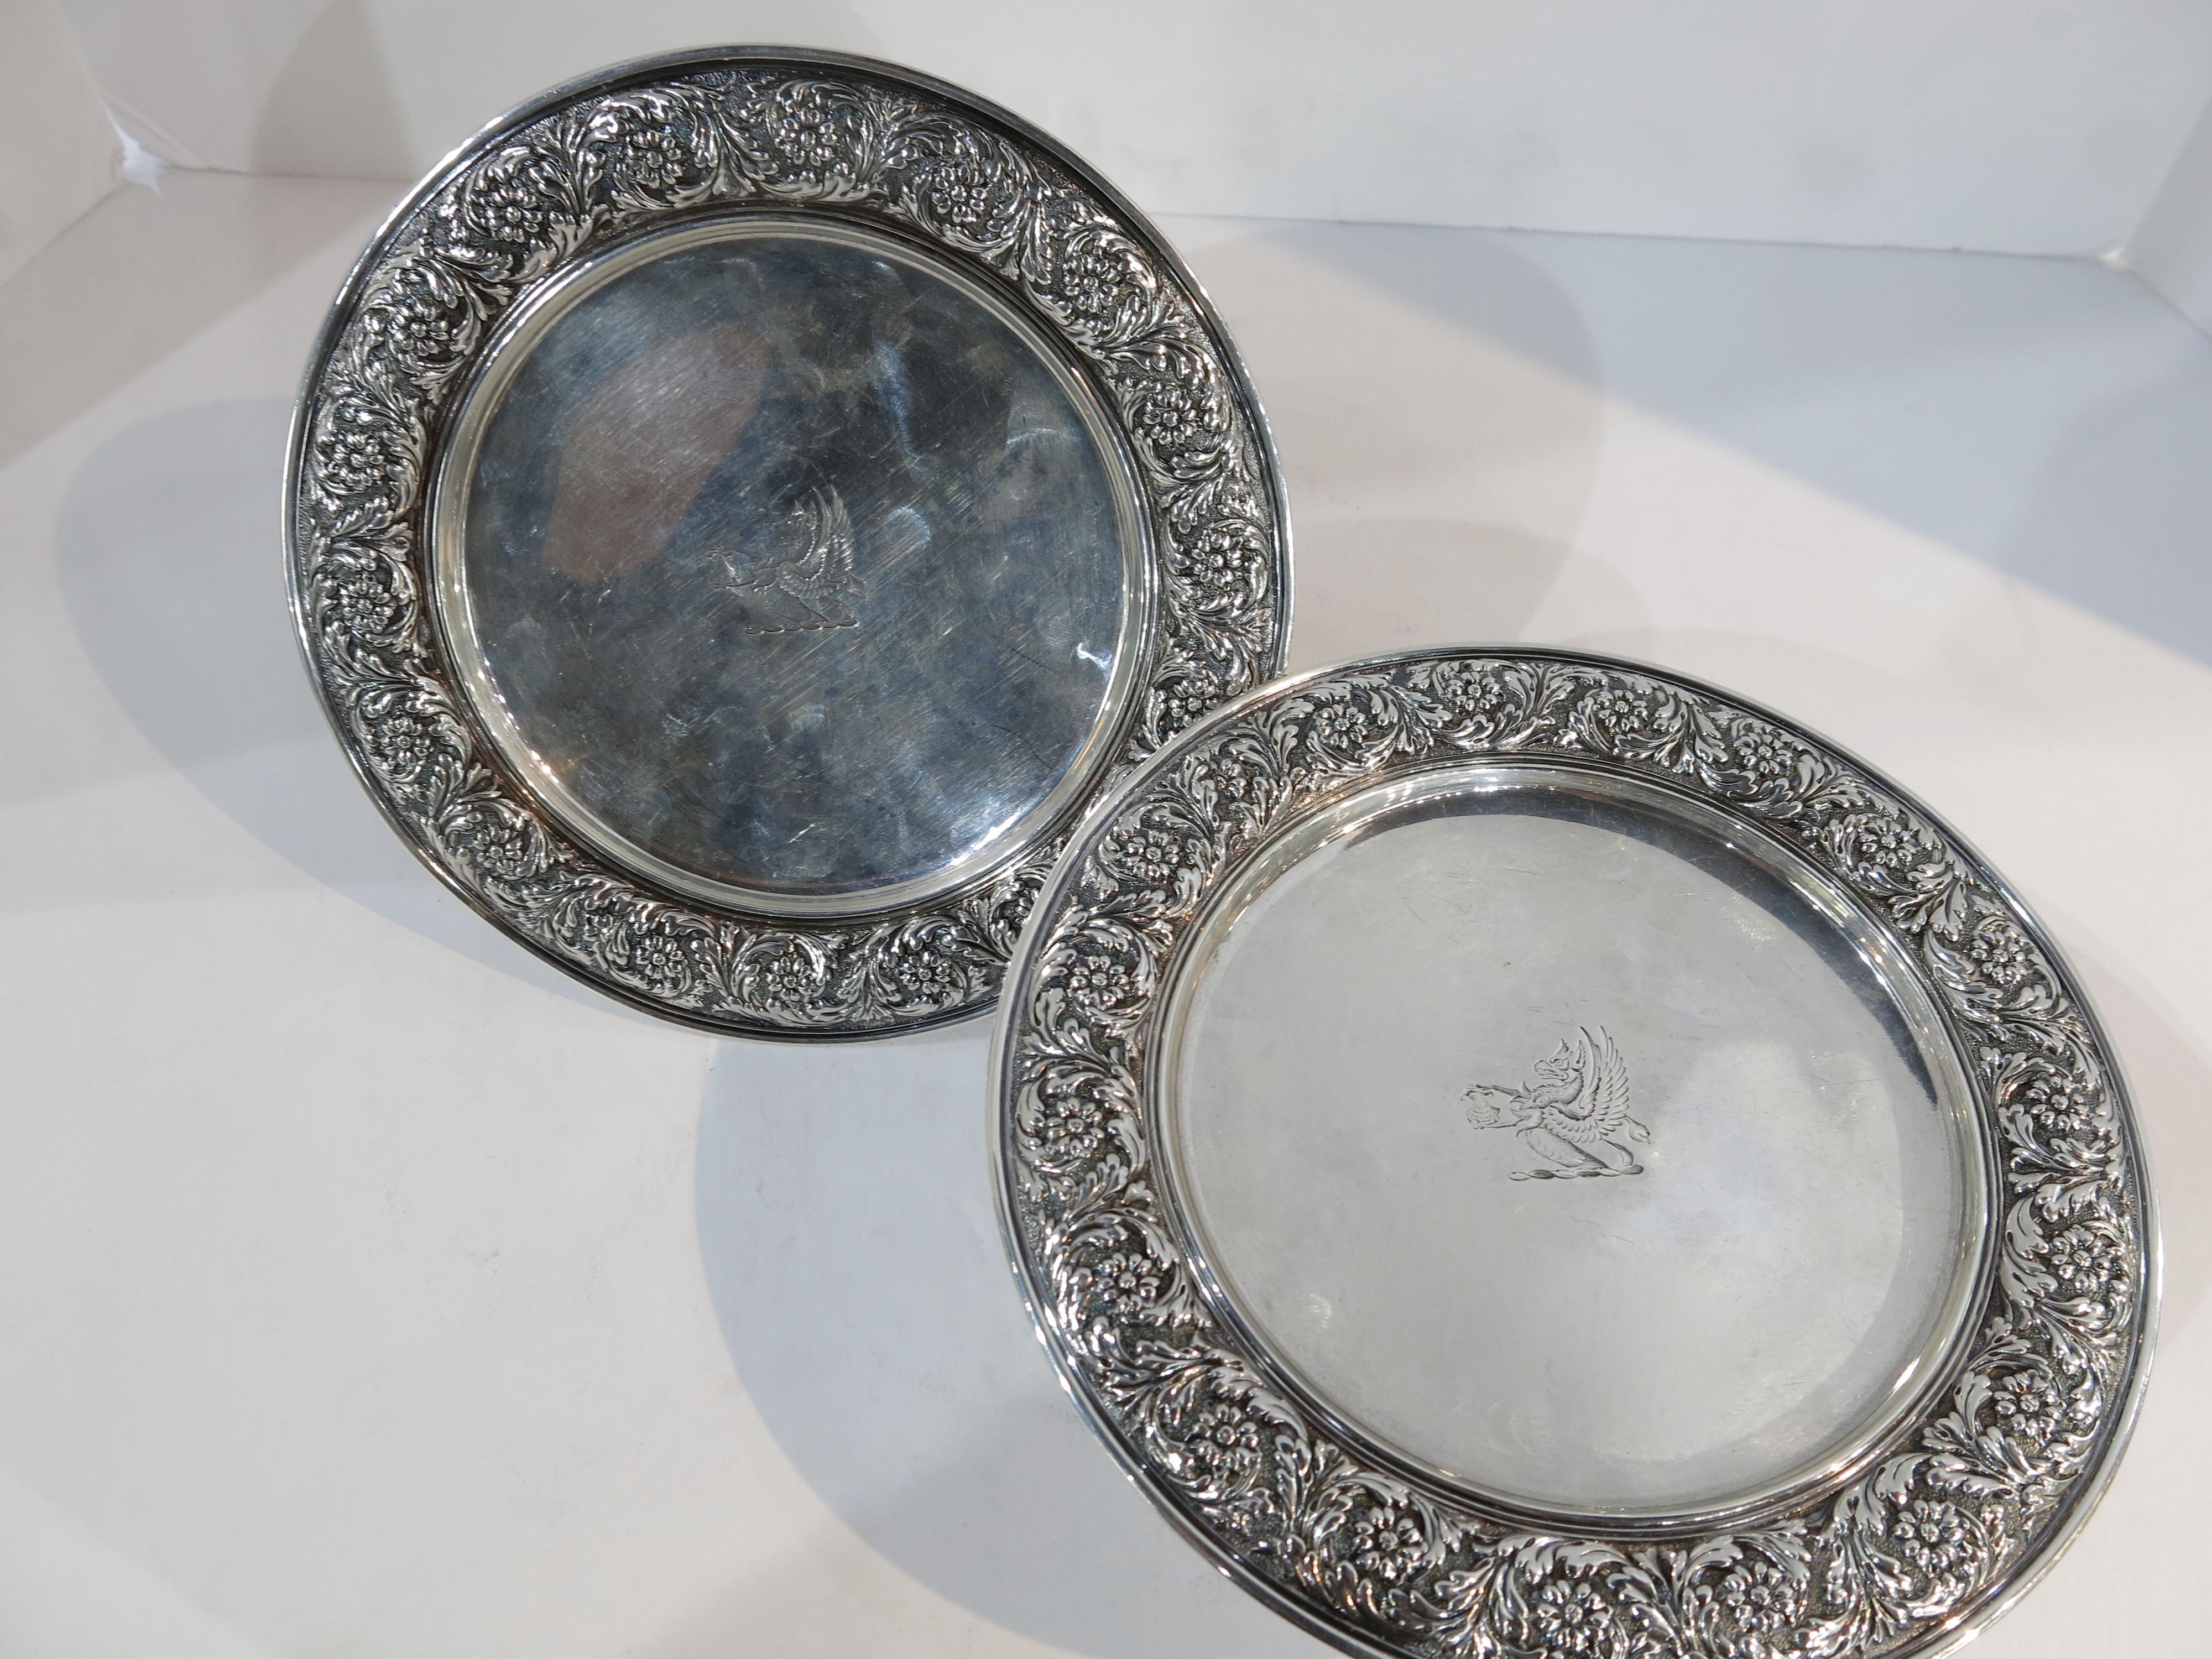 Antique, sterling silver pair of Taza made by Tiffany & Co, circa 1882. Measures: Approximate 3 1/8